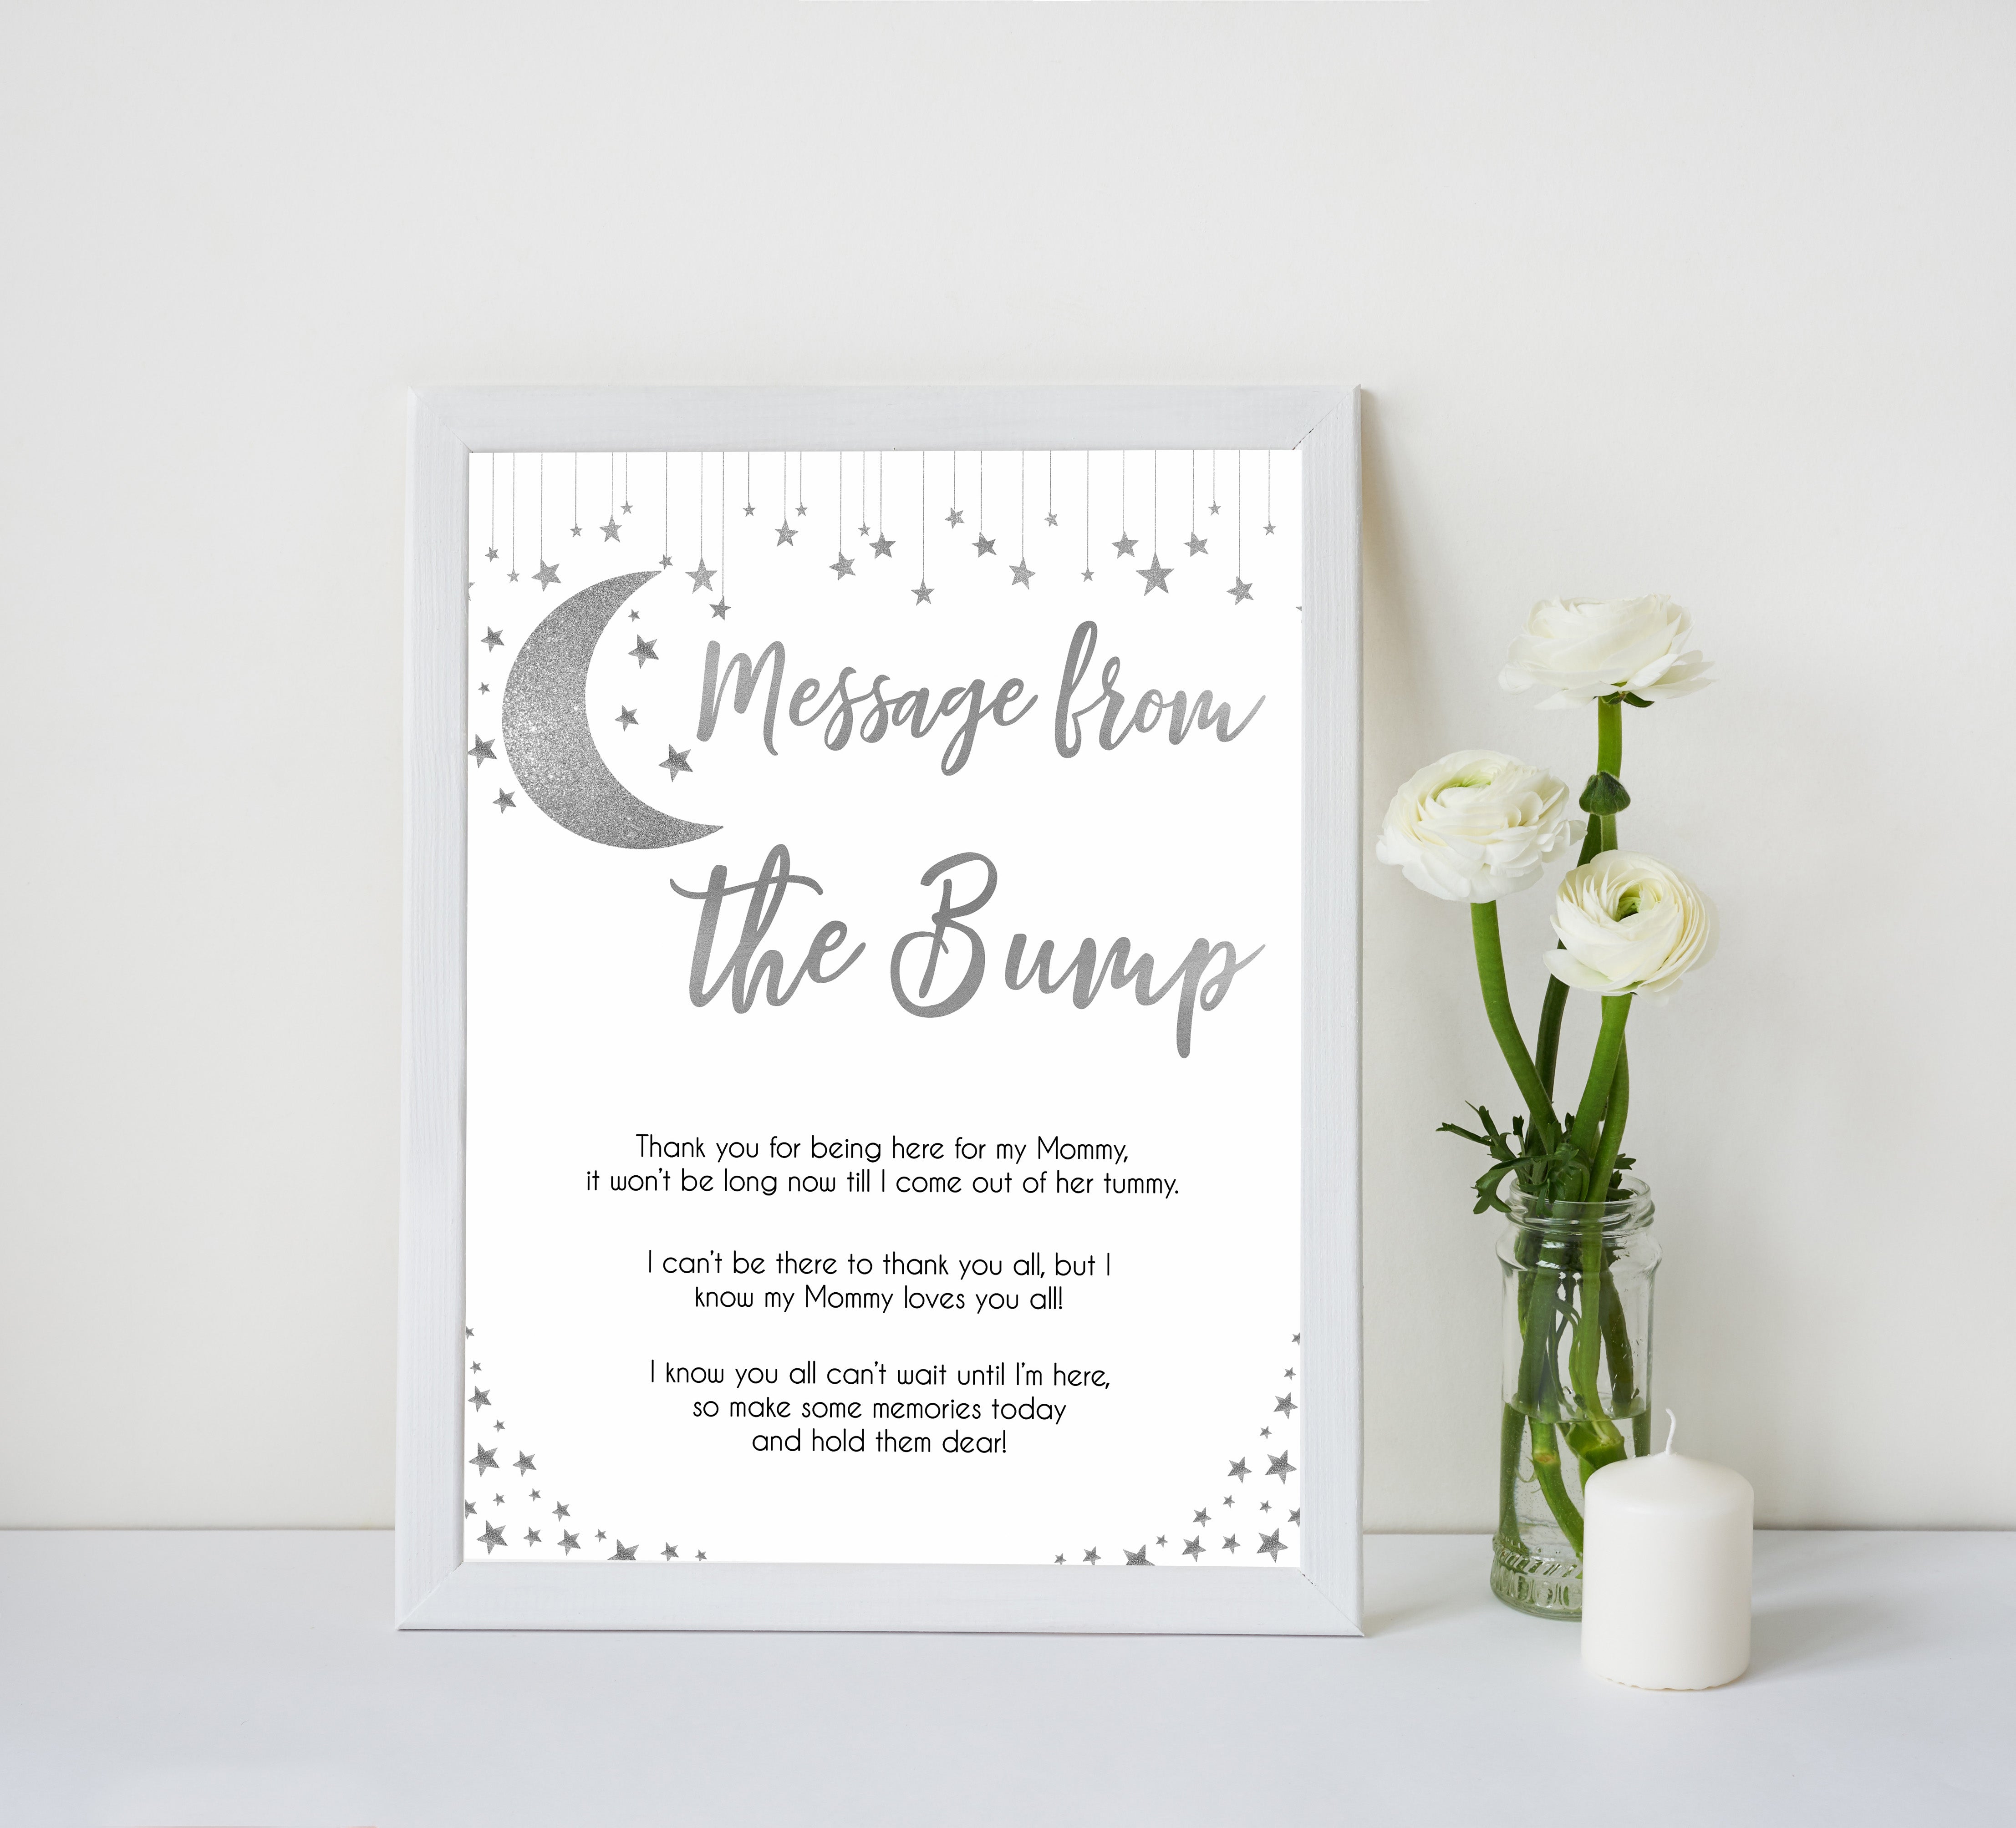 Silver little star, message from the bump baby games, baby shower games, printable baby games, fun baby games, twinkle little star games, baby games, fun baby shower ideas, baby shower ideas